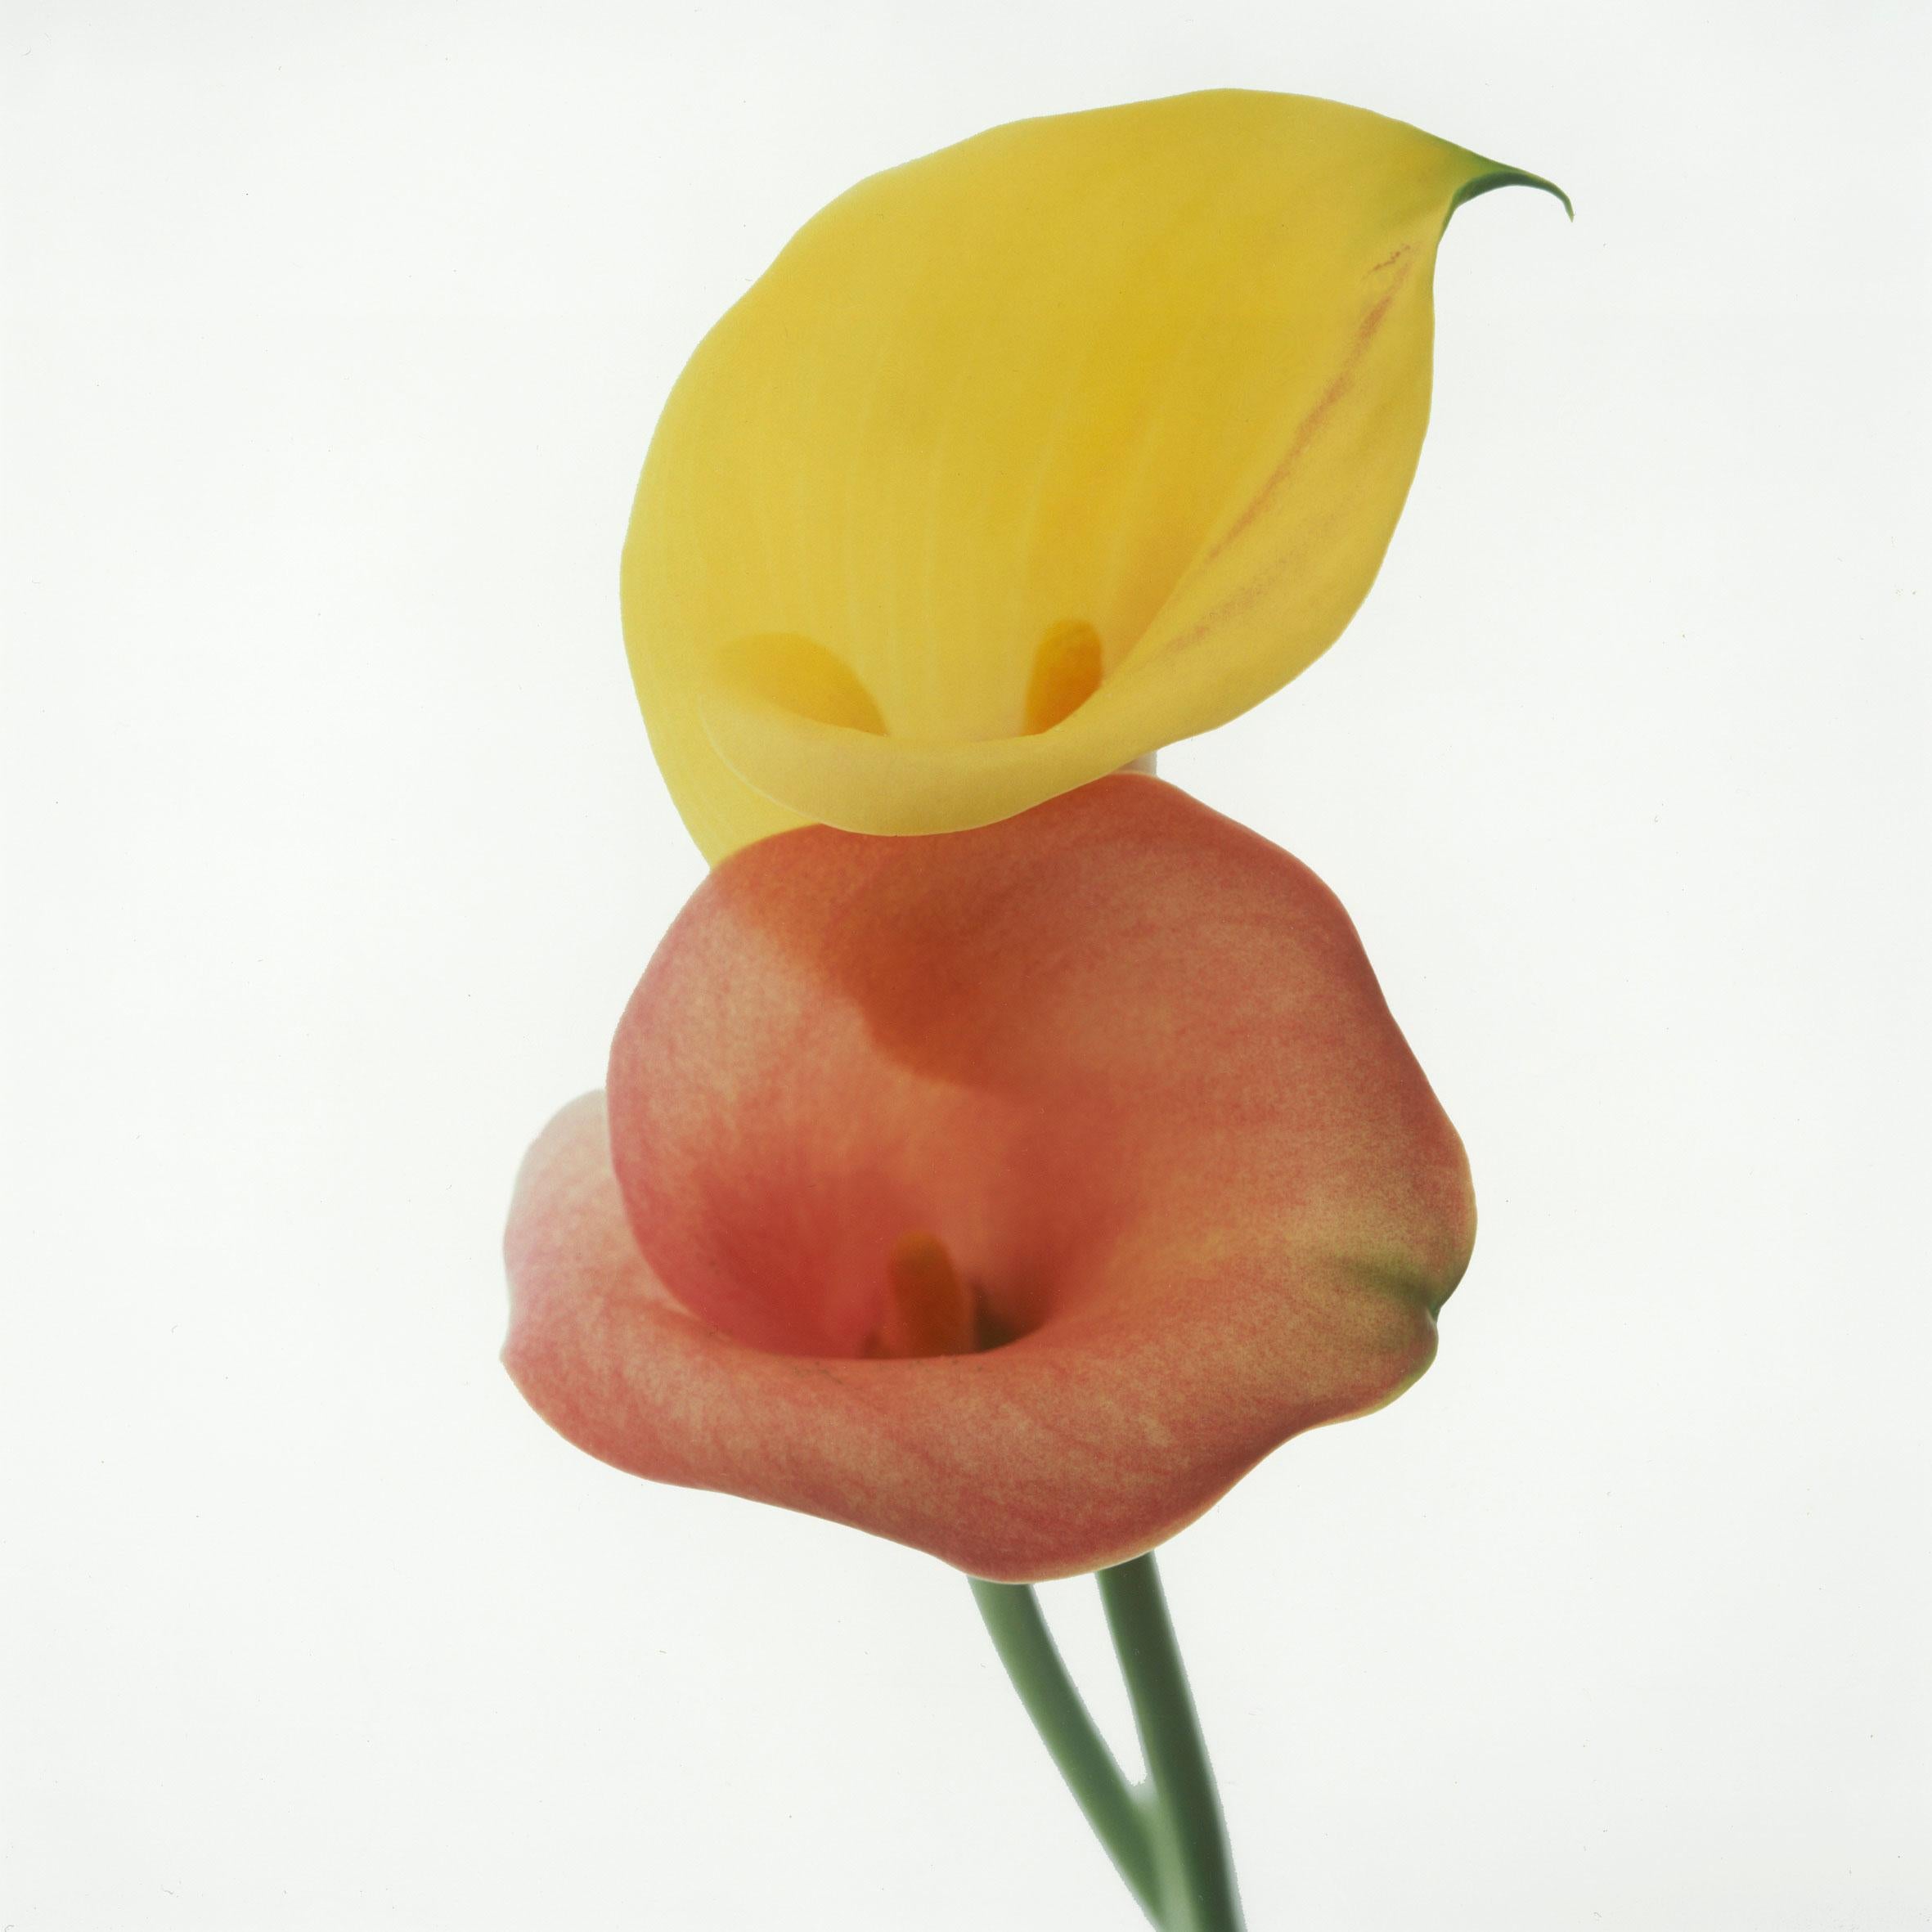 Christopher M Shackleton Color Photograph - Calla Lilies, Sill Life Flowers, Pigment Print, from medium format transparency